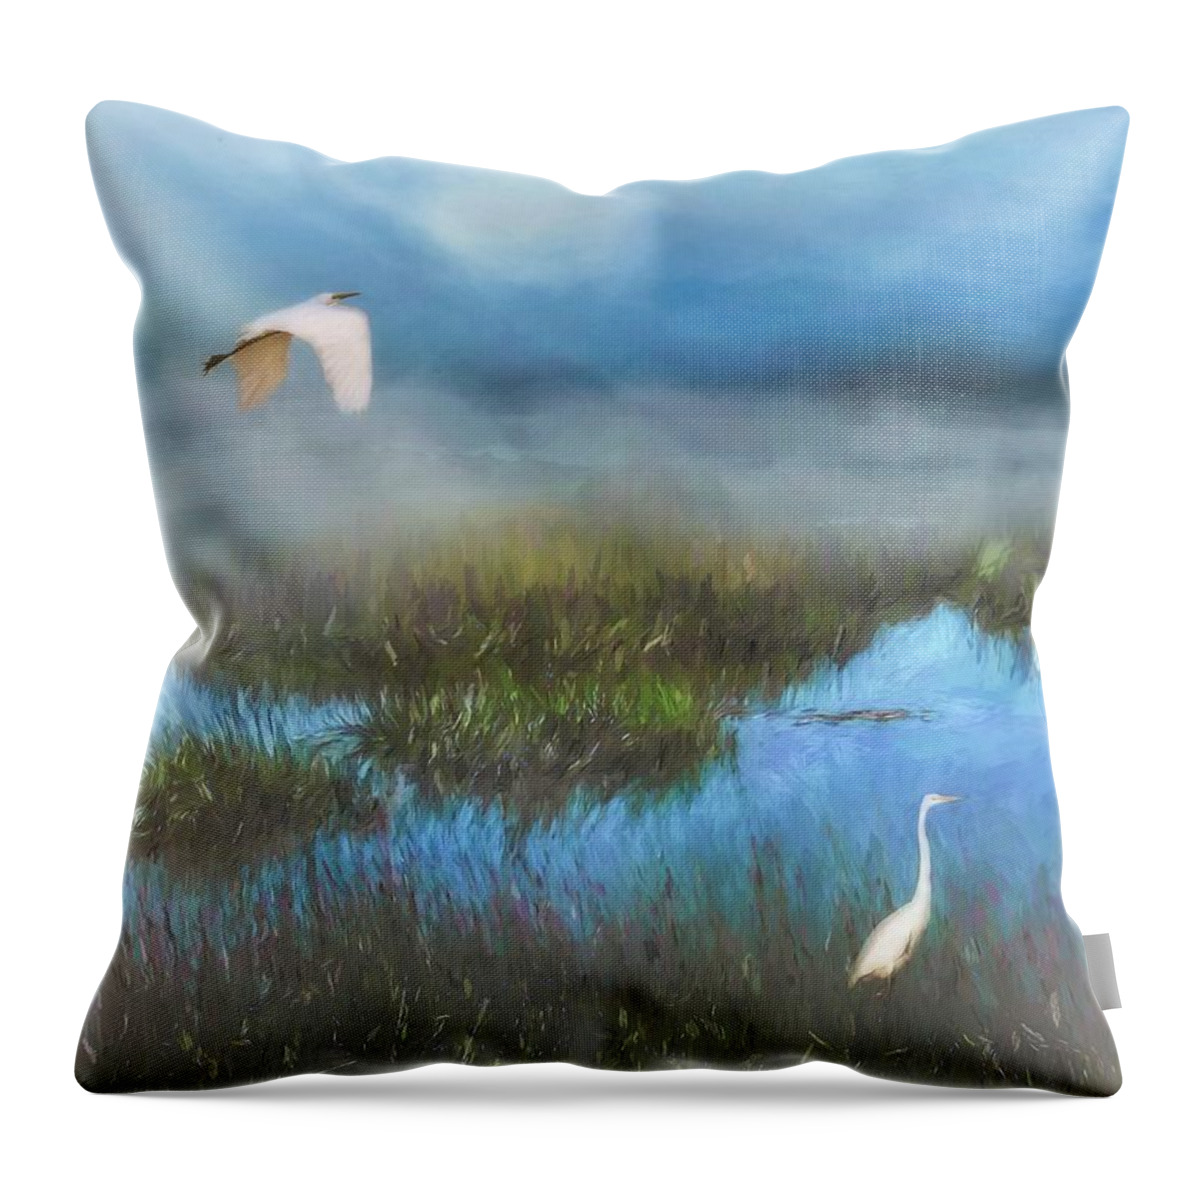 Swamp Throw Pillow featuring the photograph Marsh Mist Cumberland Island, Georgia by Marjorie Whitley